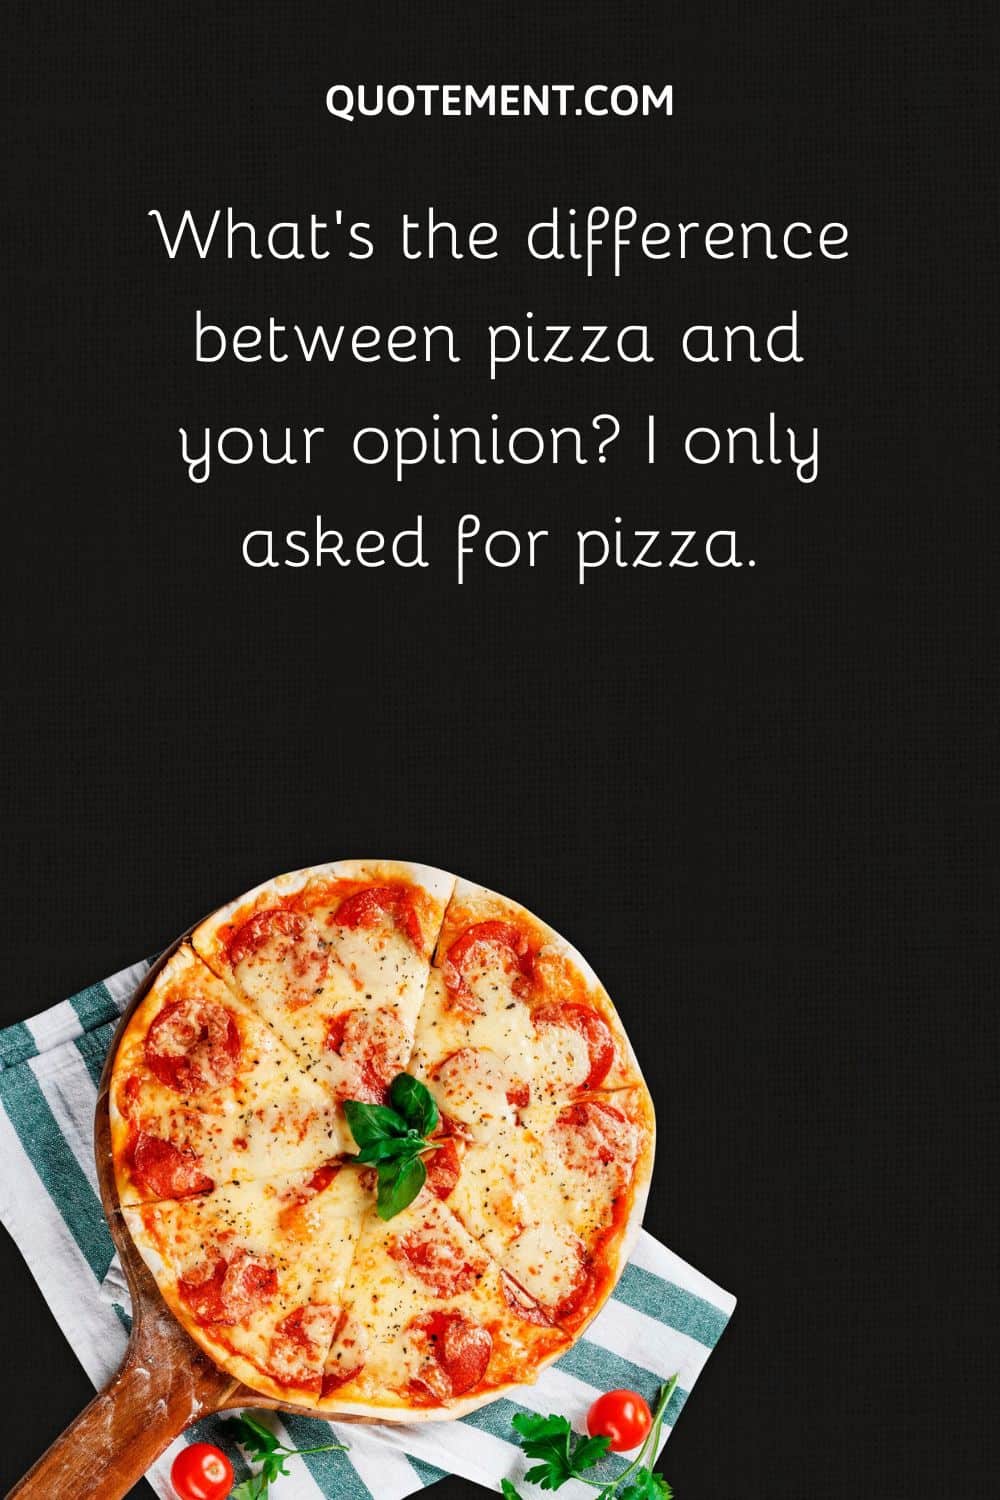 What’s the difference between pizza and your opinion